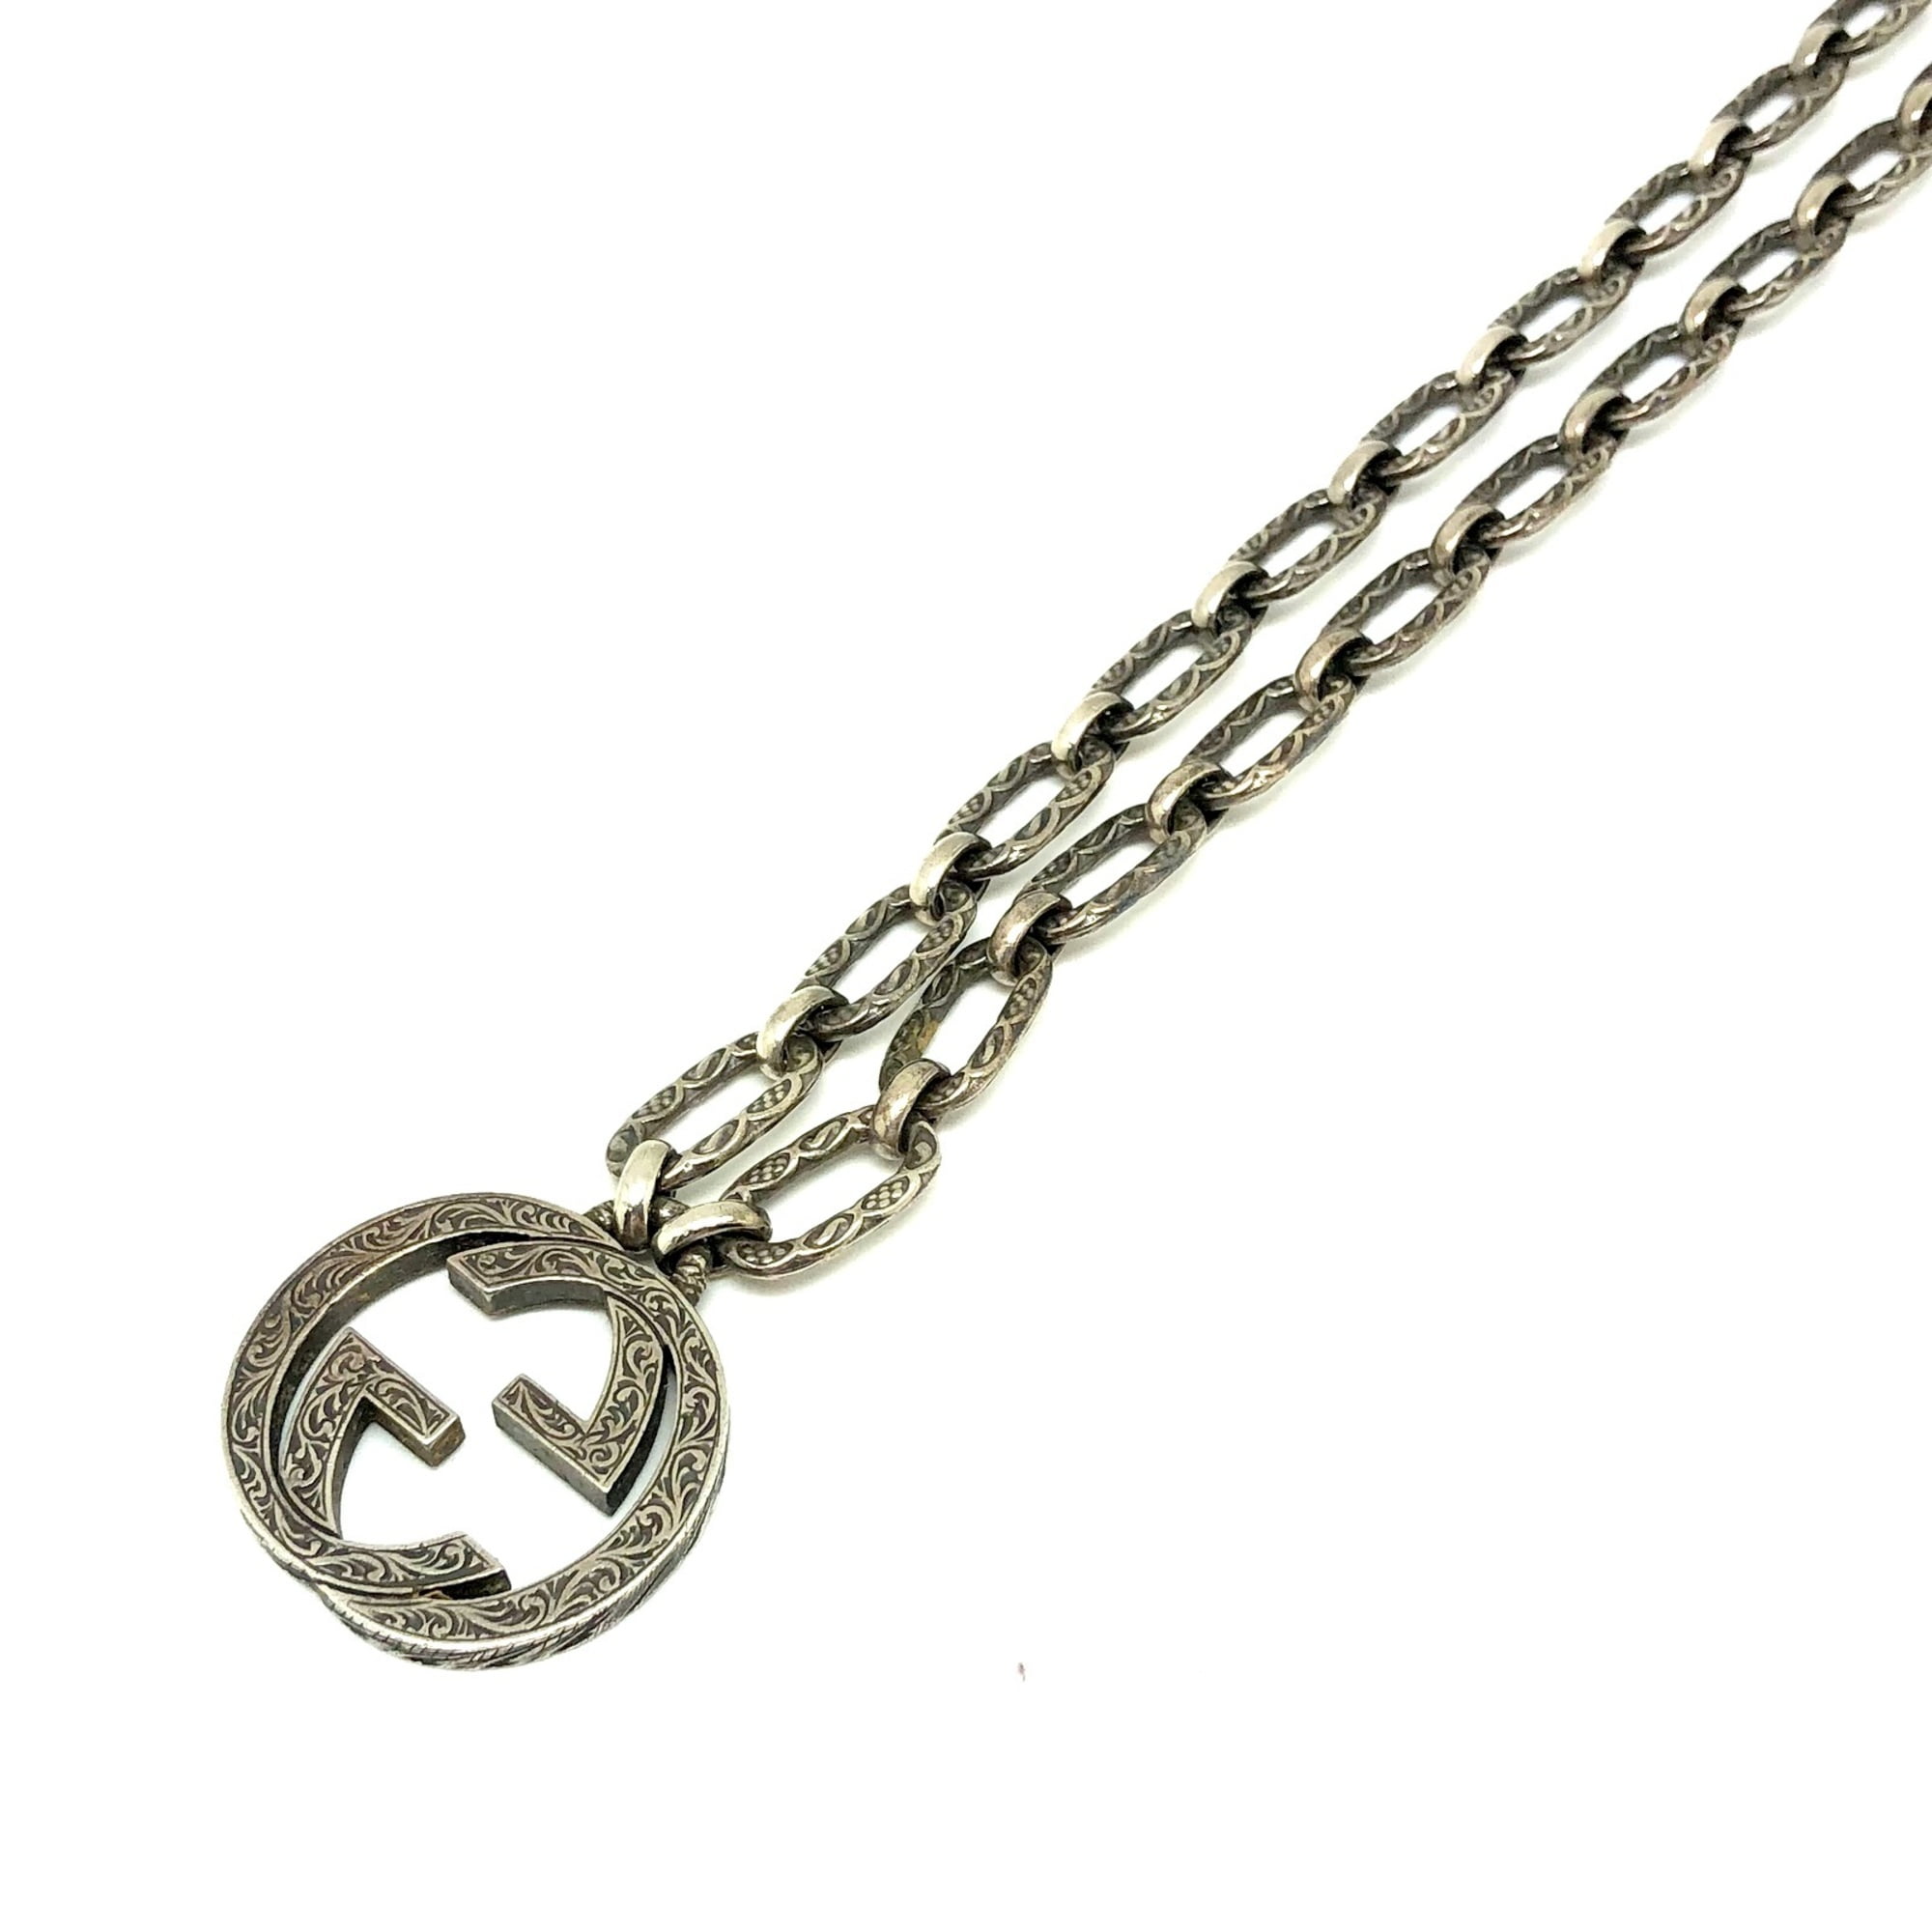 Pre-Owned GUCCI Gucci interlocking G necklace 524890 Ag925 SILVER silver  men (Like New)